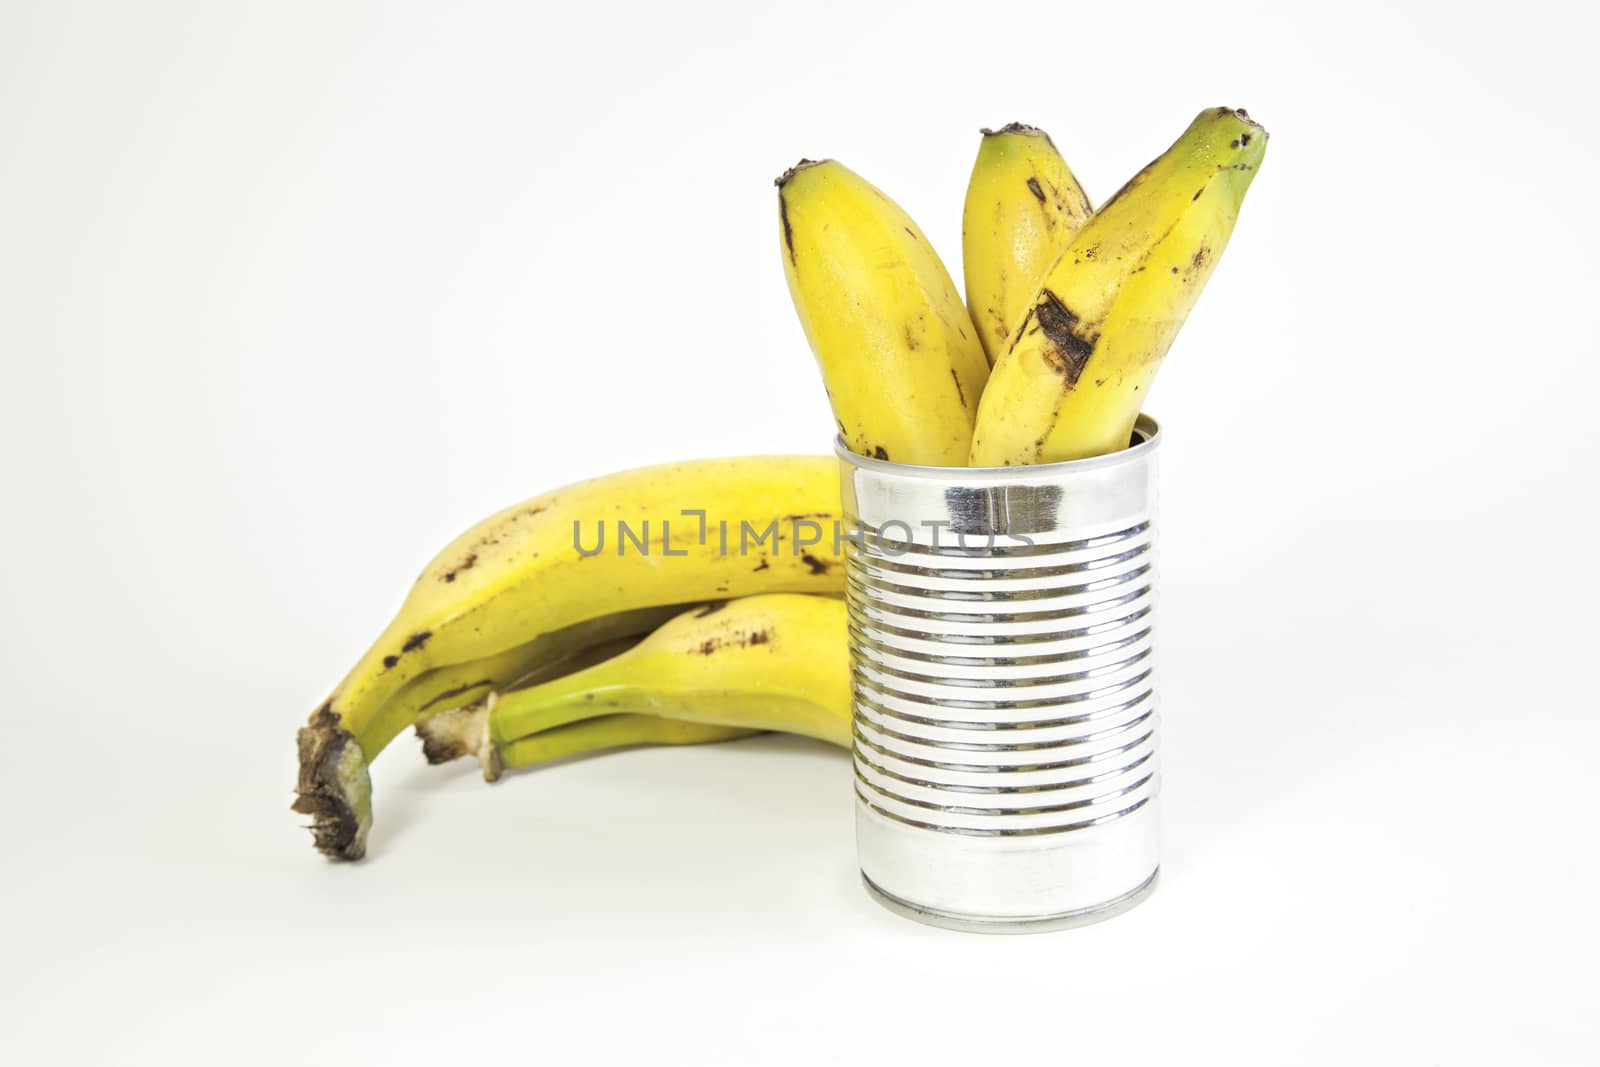 Bananas and canned fruit detail preserved in a can, food healthy, diet